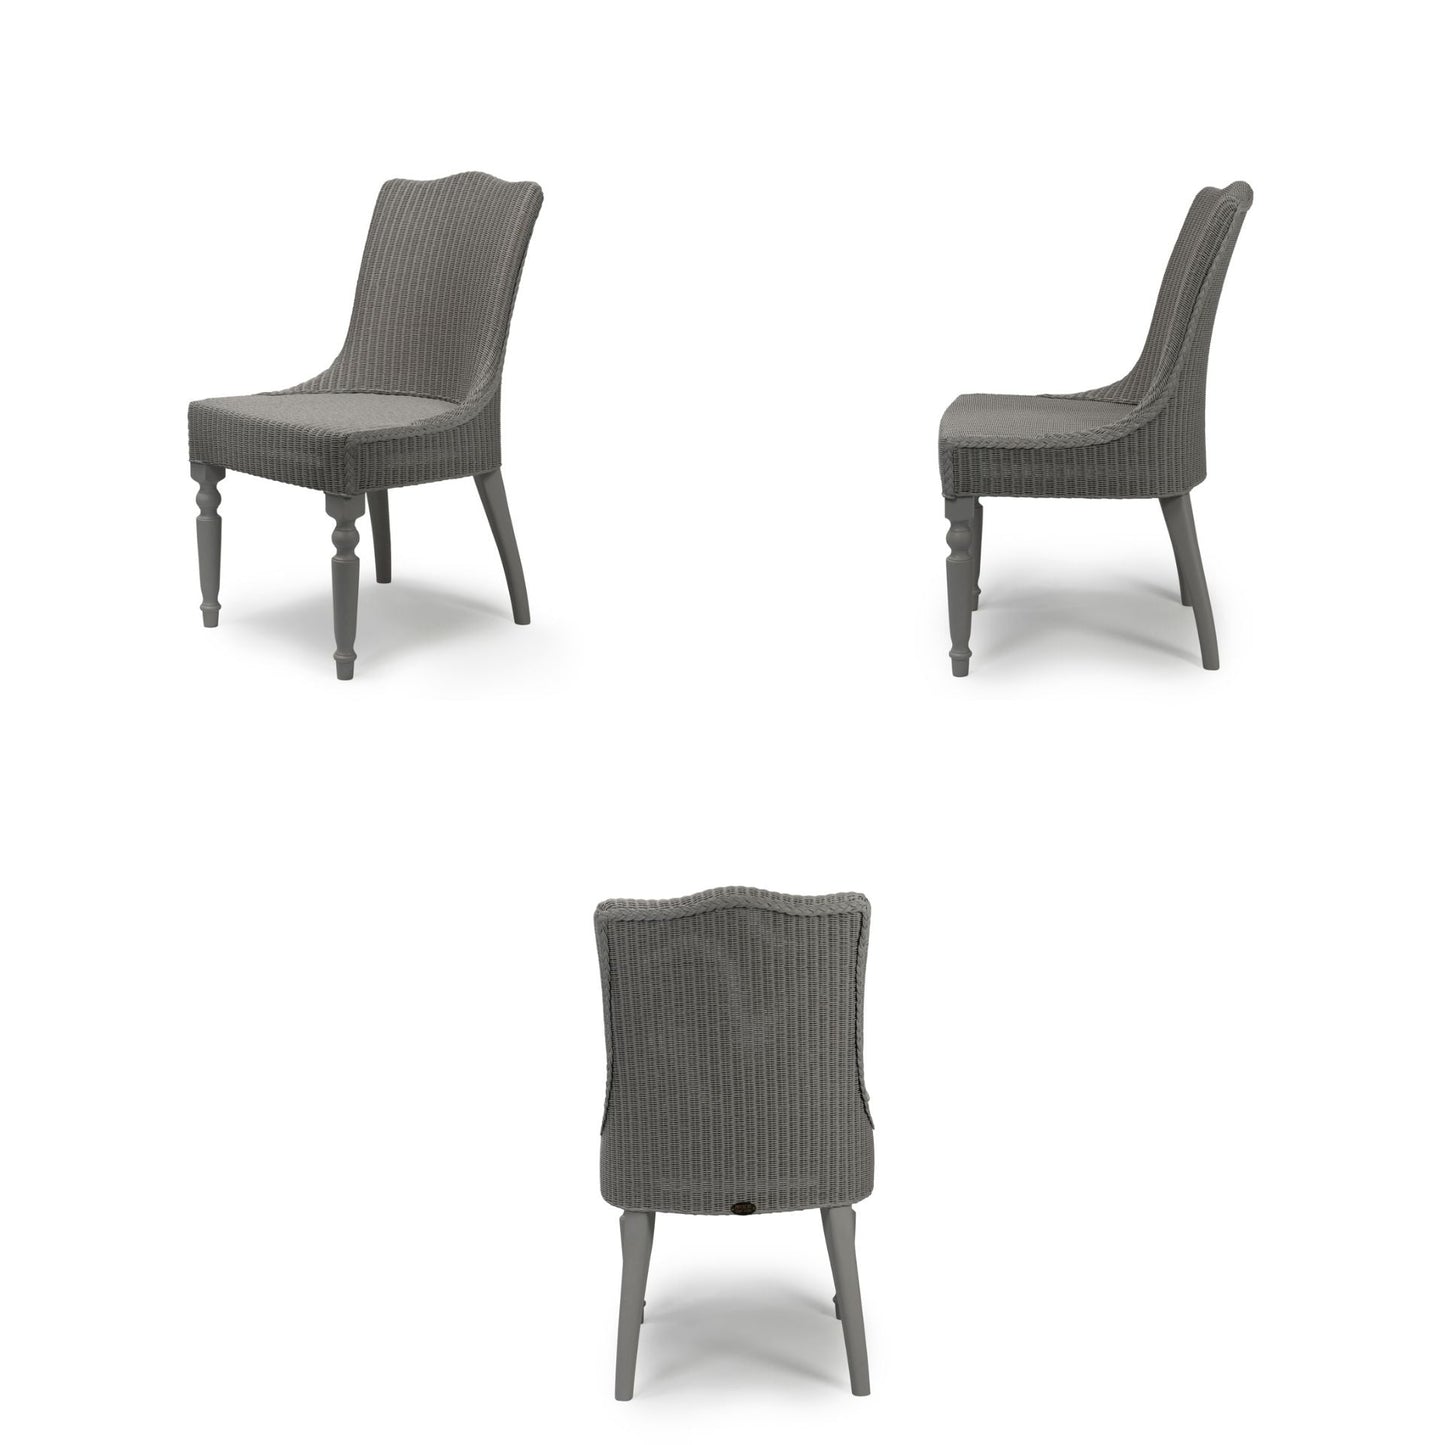 Special offer discount  Grosmont Dining Chair- set of 4